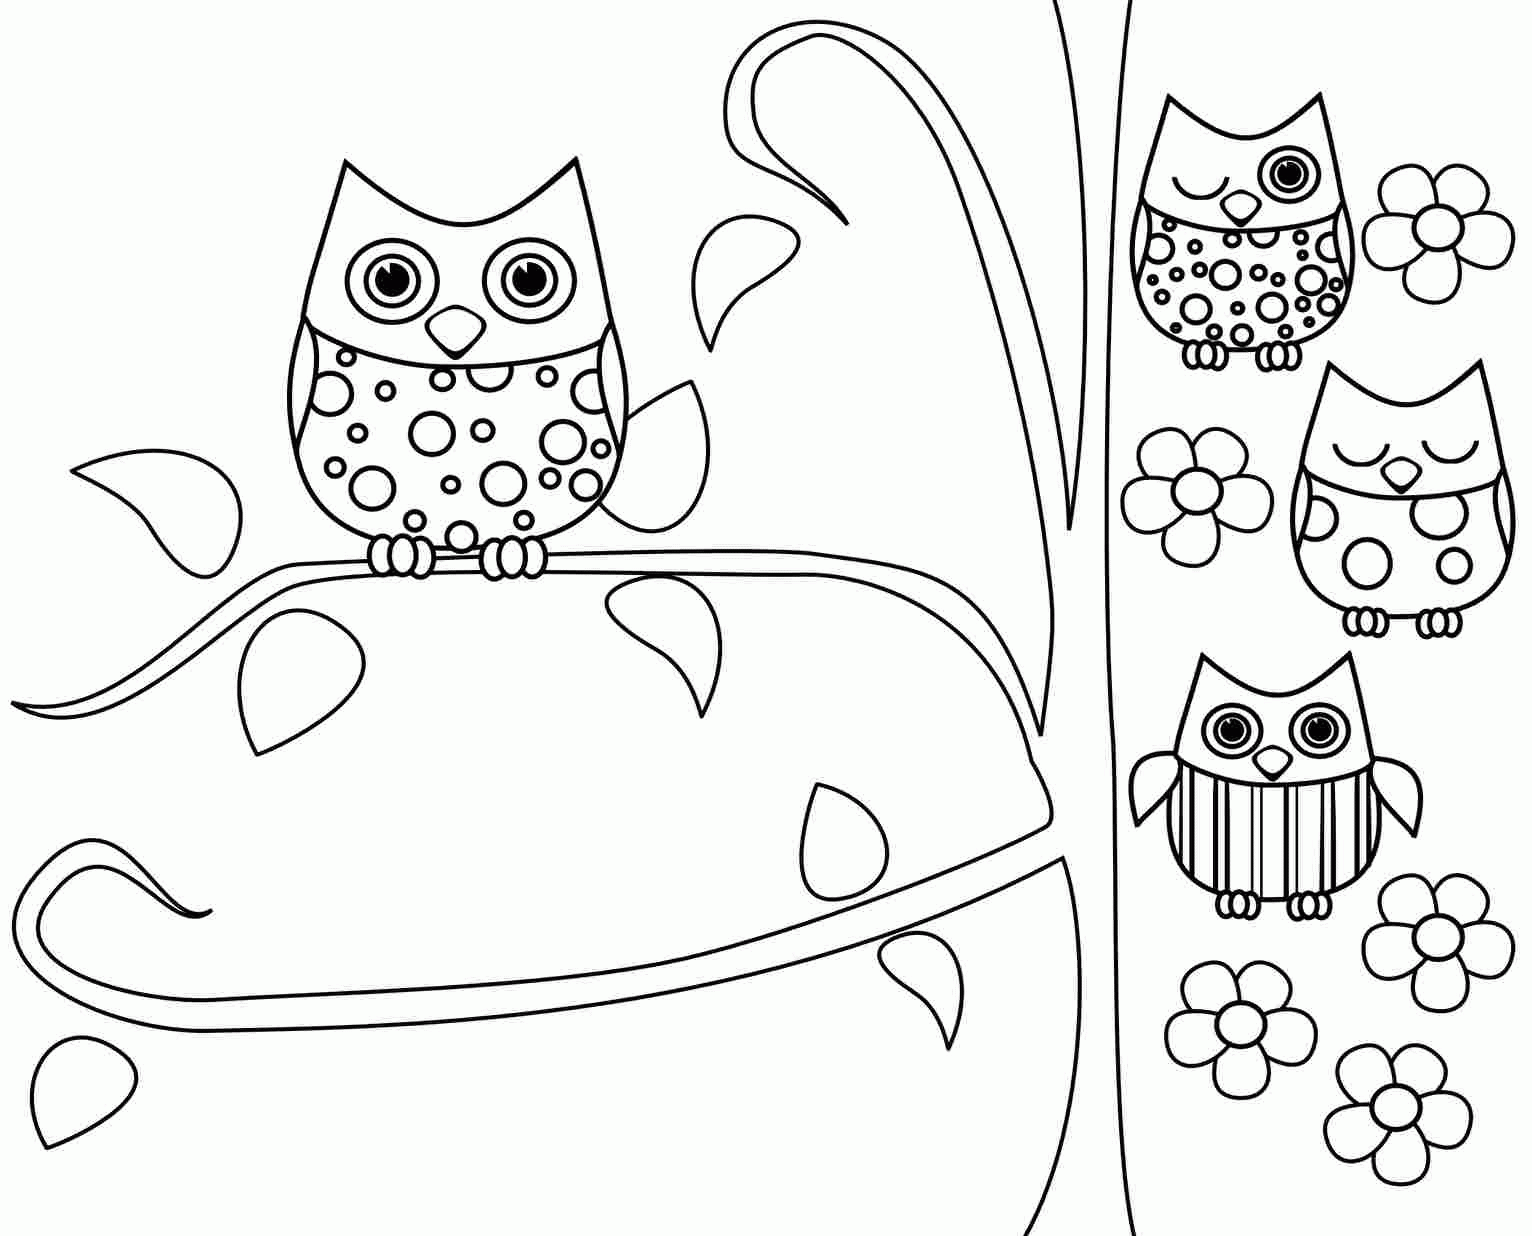 Cute Halloween Owl Coloring Pages Owl Doodle Art Coloring Pages